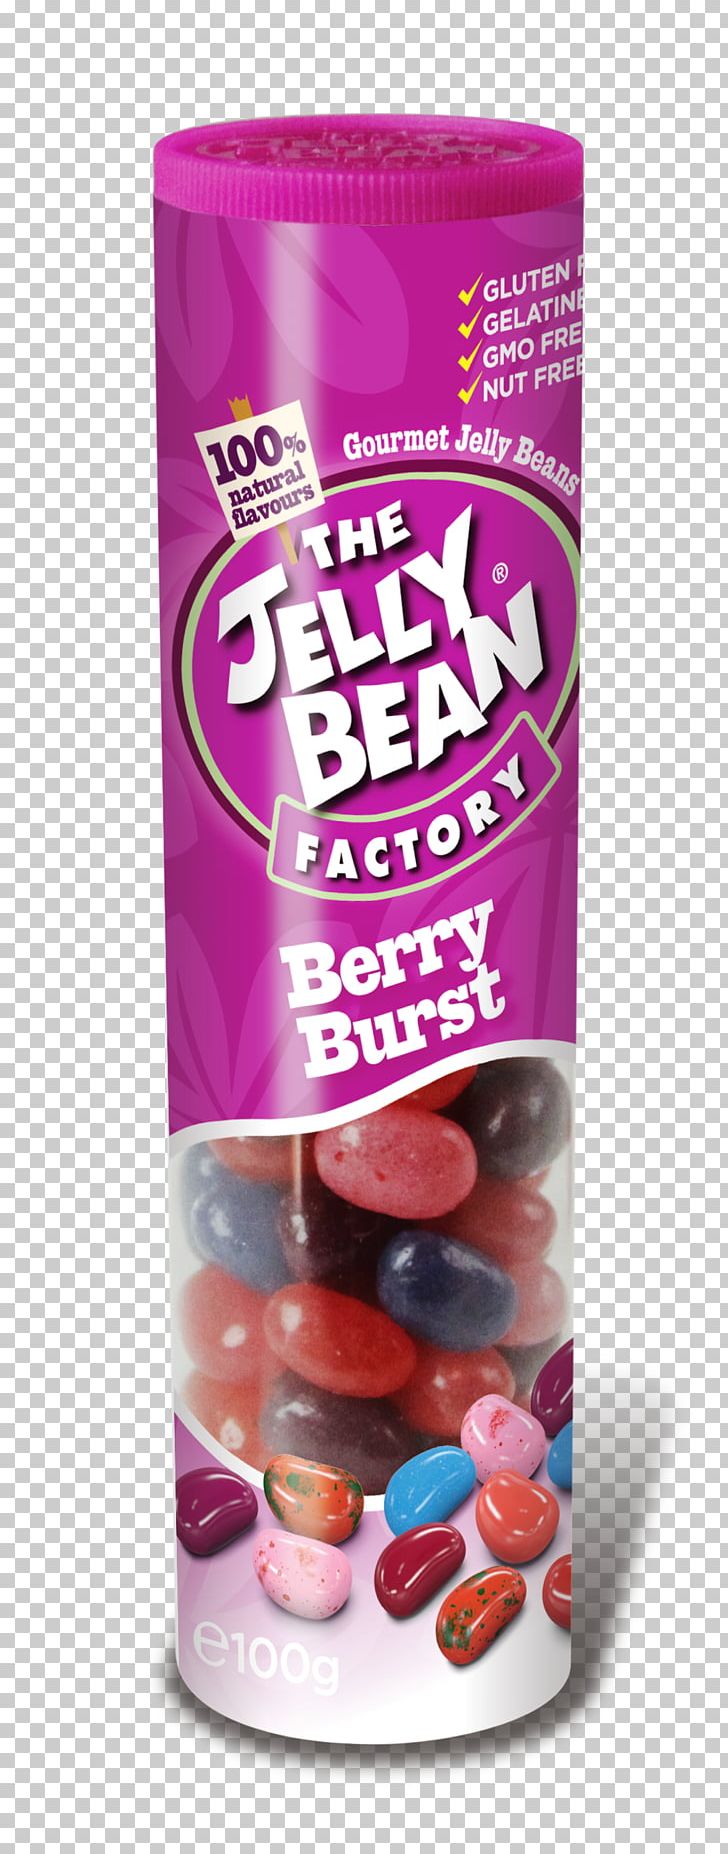 The Jelly Belly Candy Company Gelatin Dessert Jelly Bean Flavor PNG, Clipart, Bean, Berry, Candy, Cocktail, Confectionery Free PNG Download